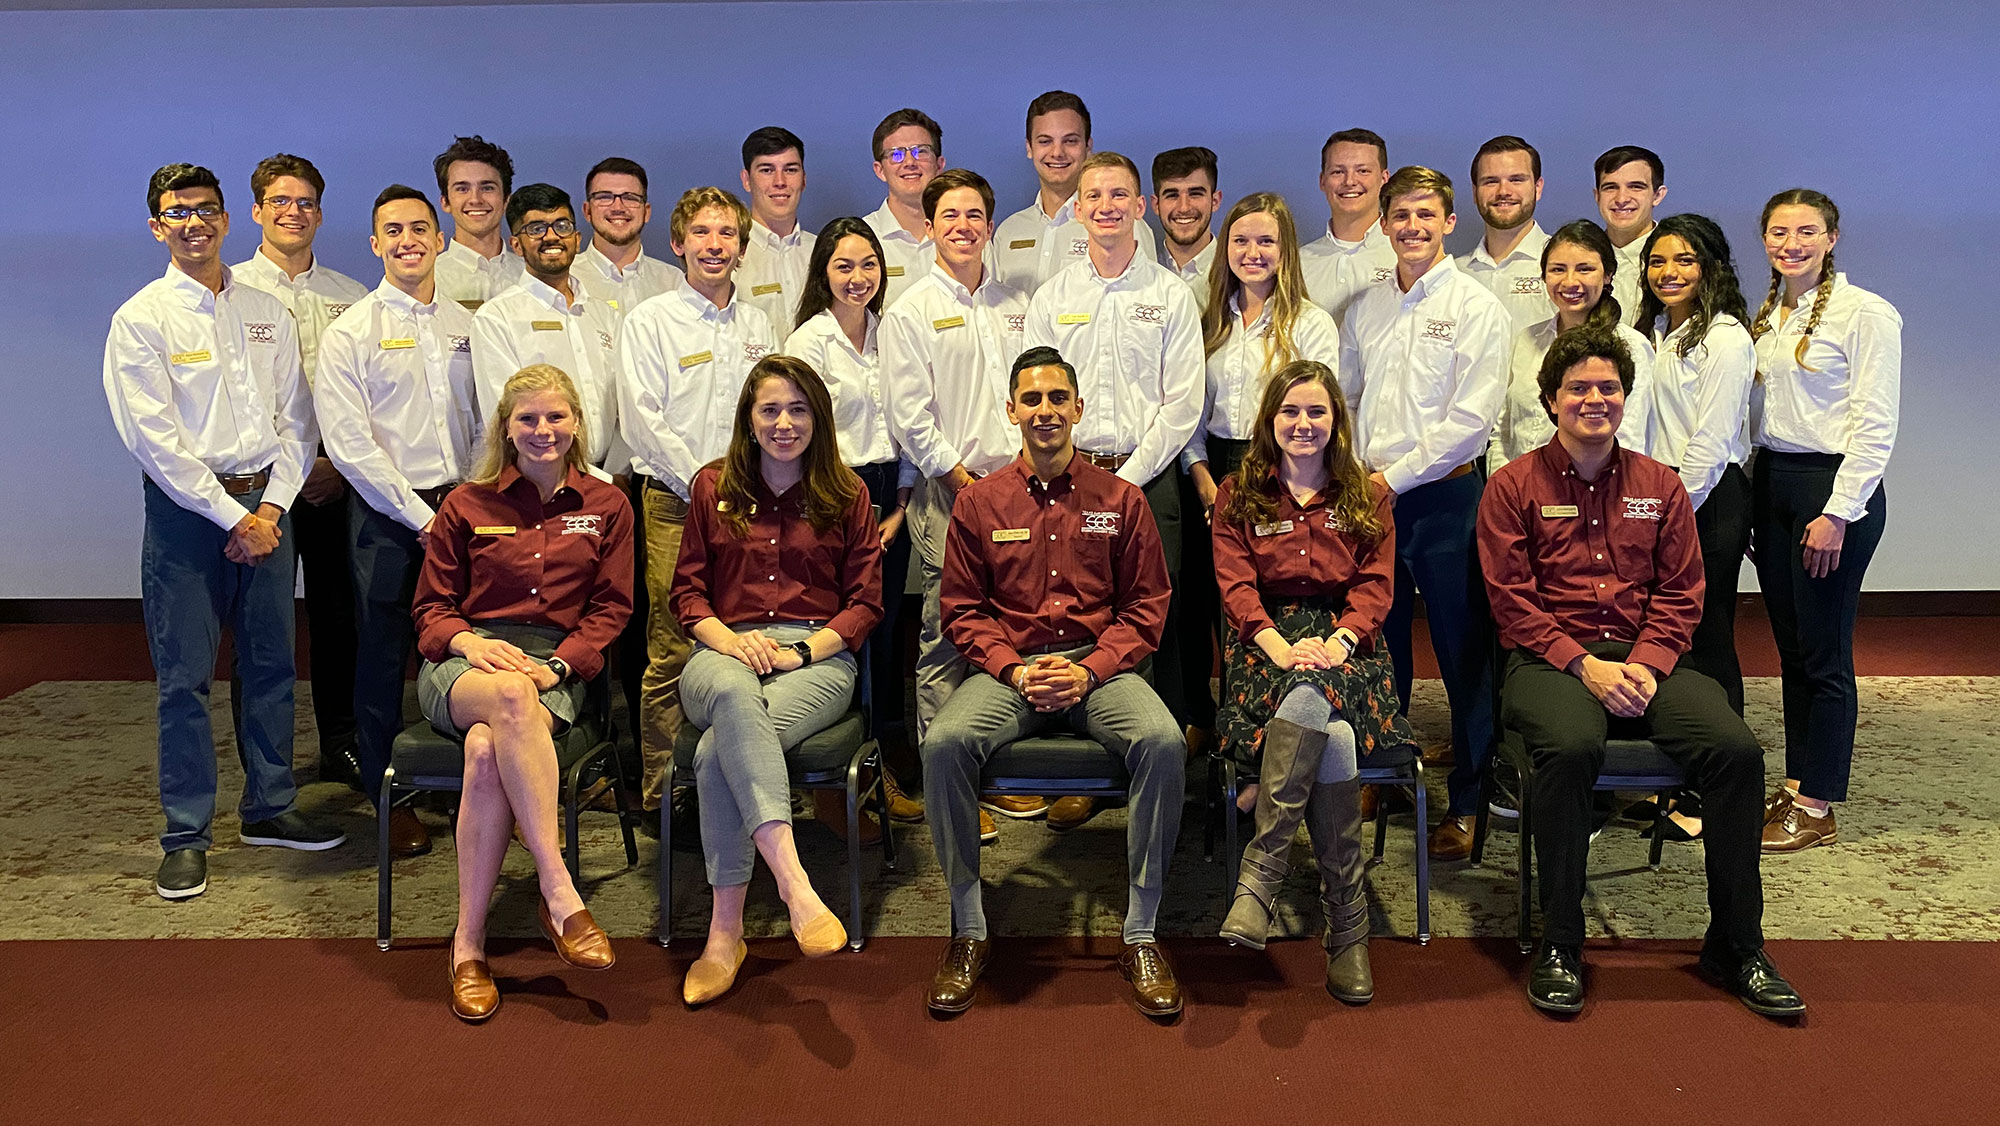 Members of the Student Engineers' Council 2019-2020 Executive Committee pose for a photo.